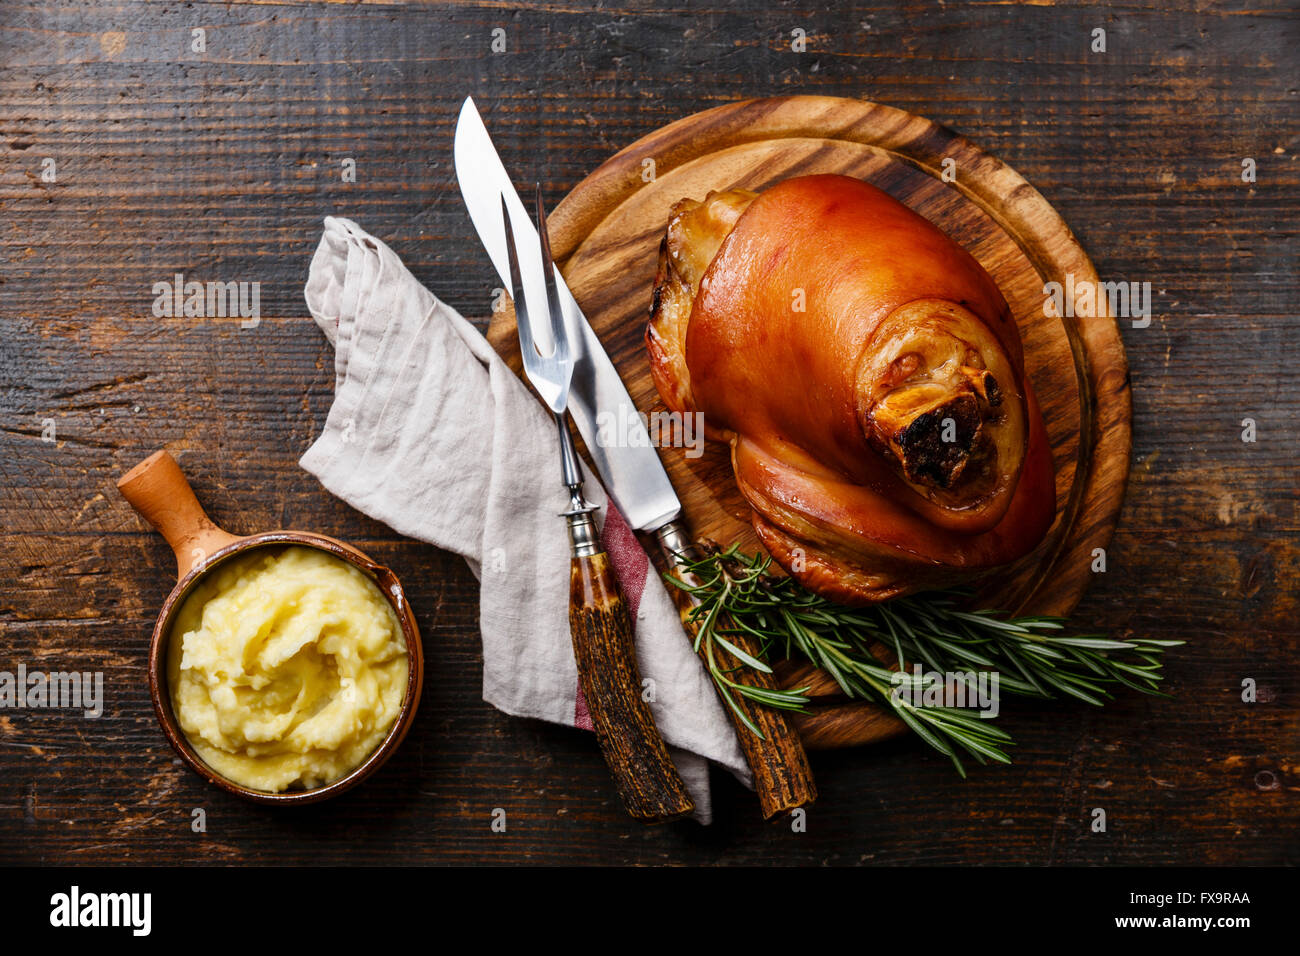 Roasted pork knuckle eisbein with mashed potatoes on wooden cutting board Stock Photo